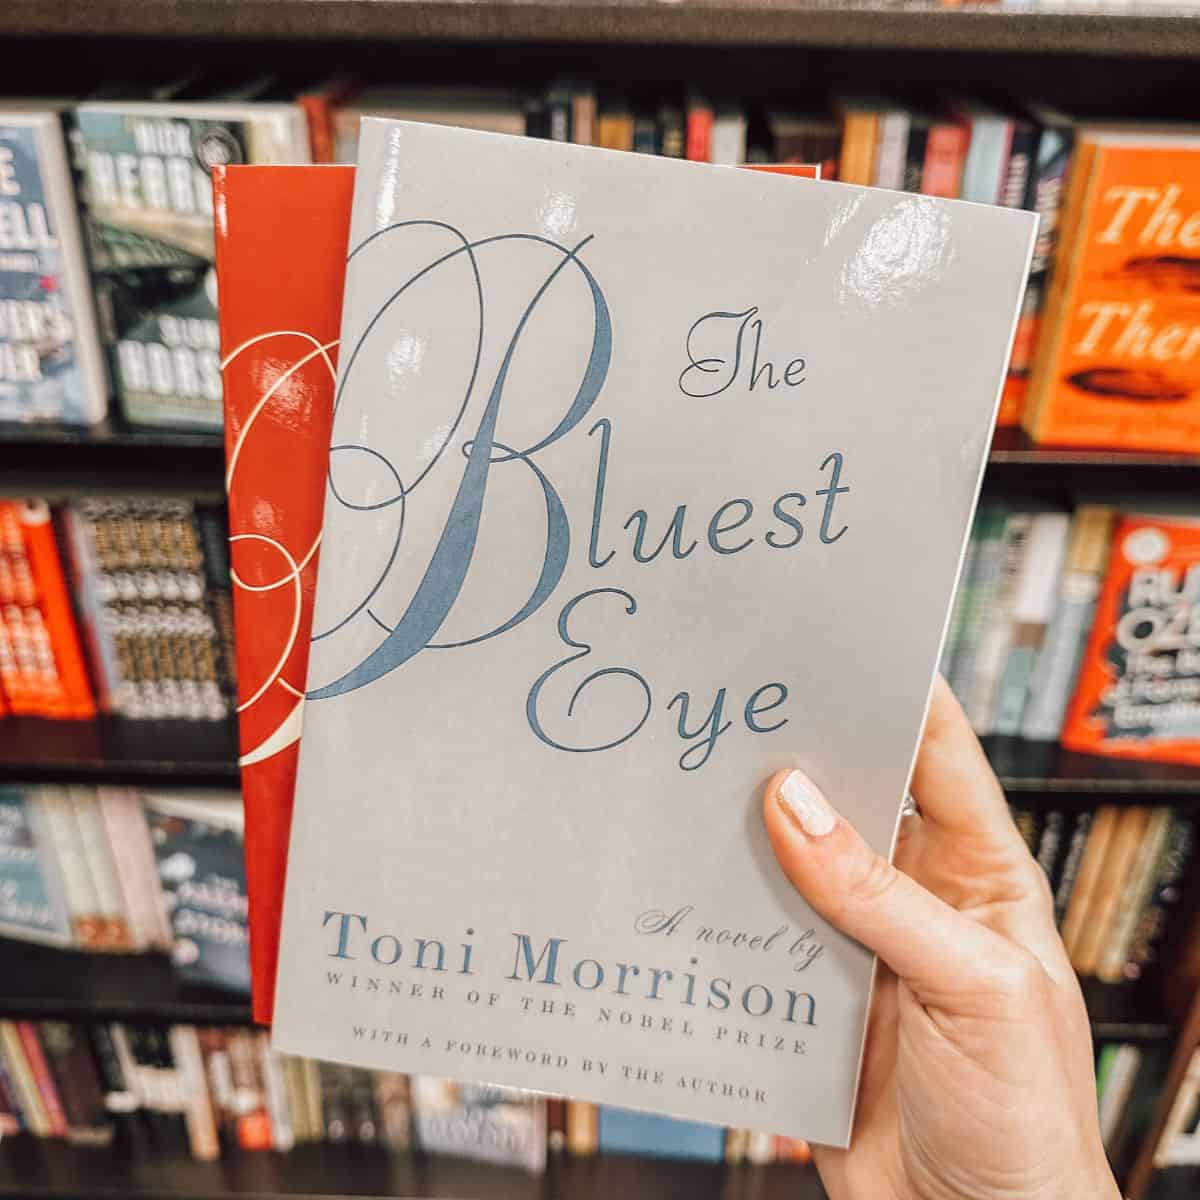 40 Important “The Bluest Eye” Quotes by Toni Morrison